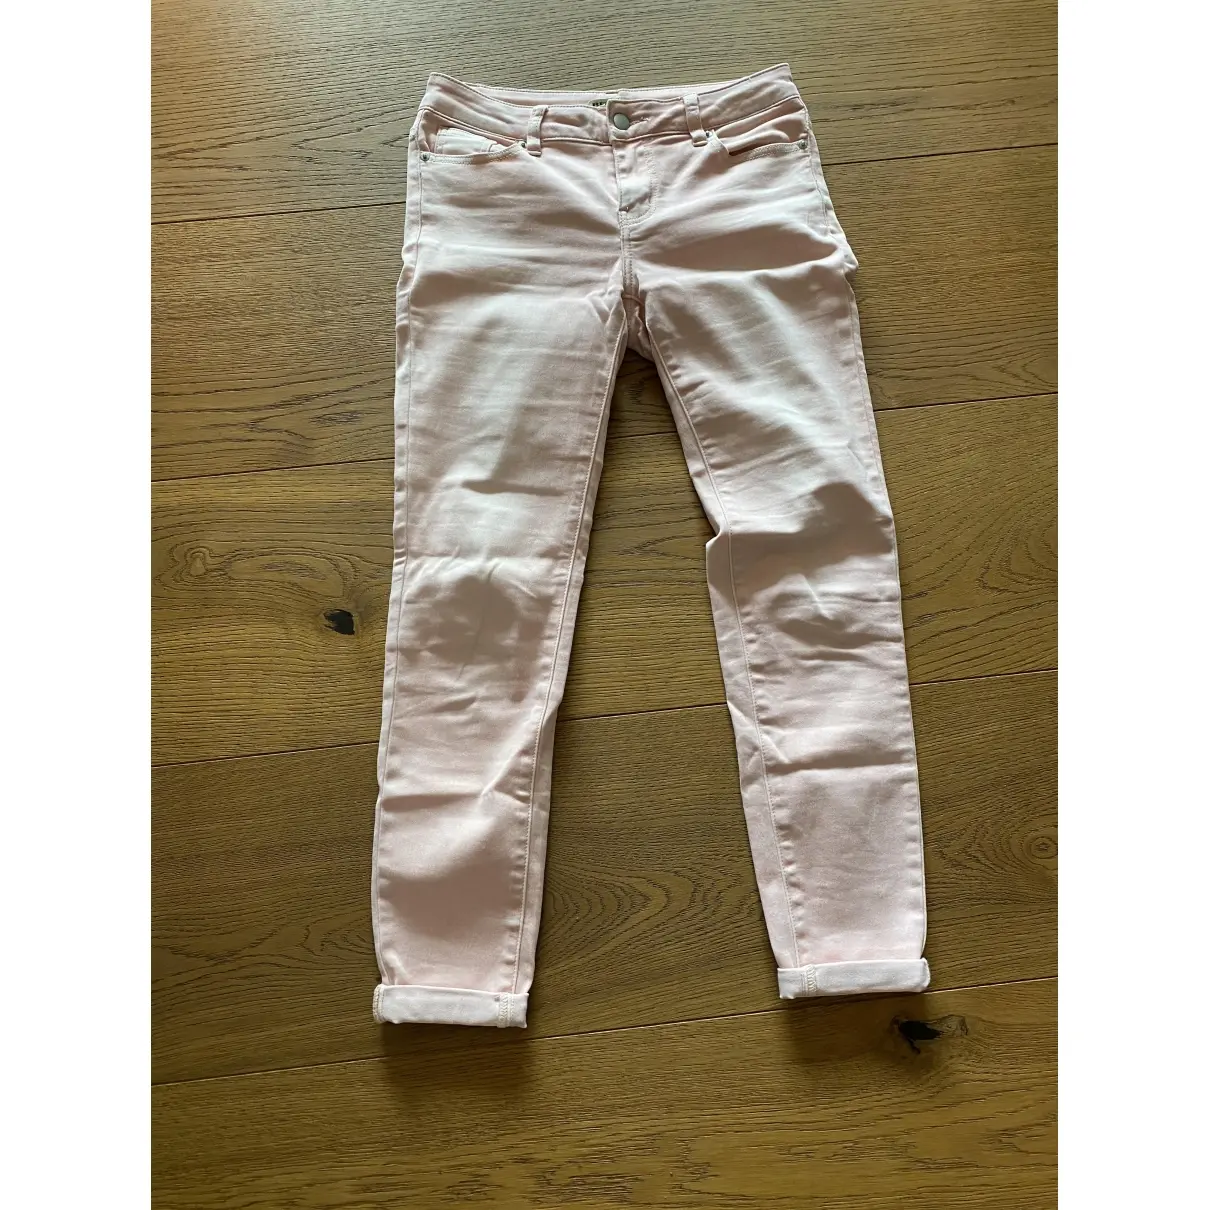 History Repeats Chino pants for sale